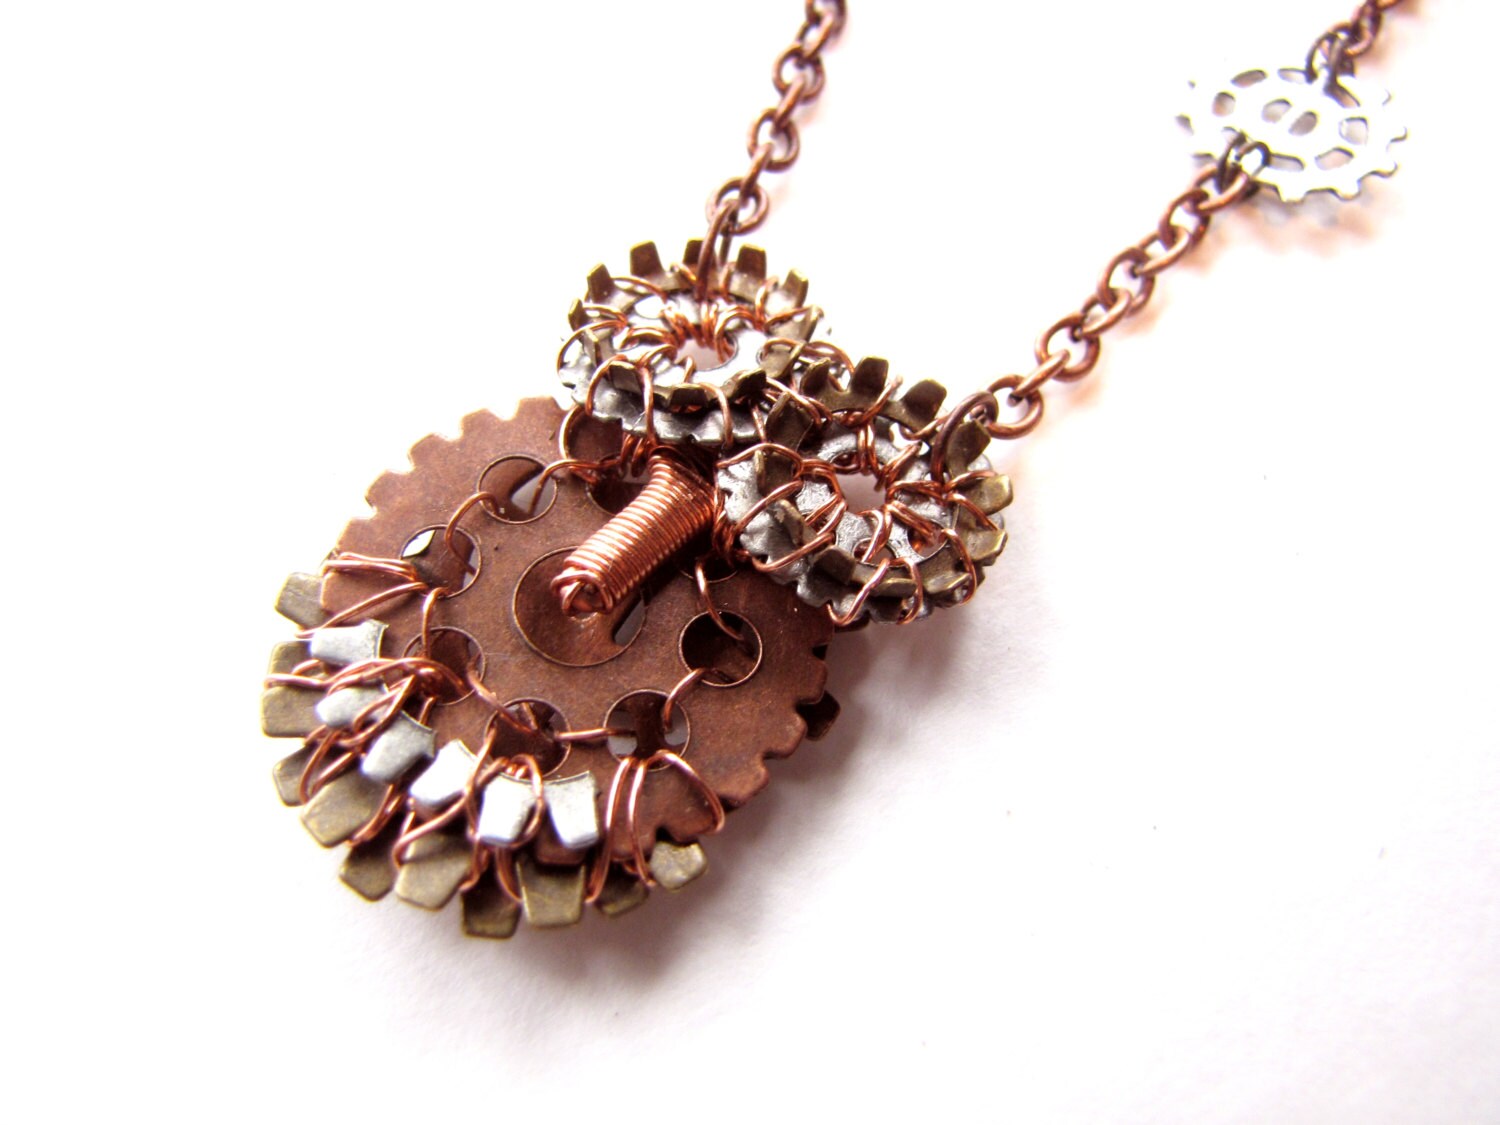 Steampunk Owl Necklace Handmade with Cogs, Gears and Copper Wire